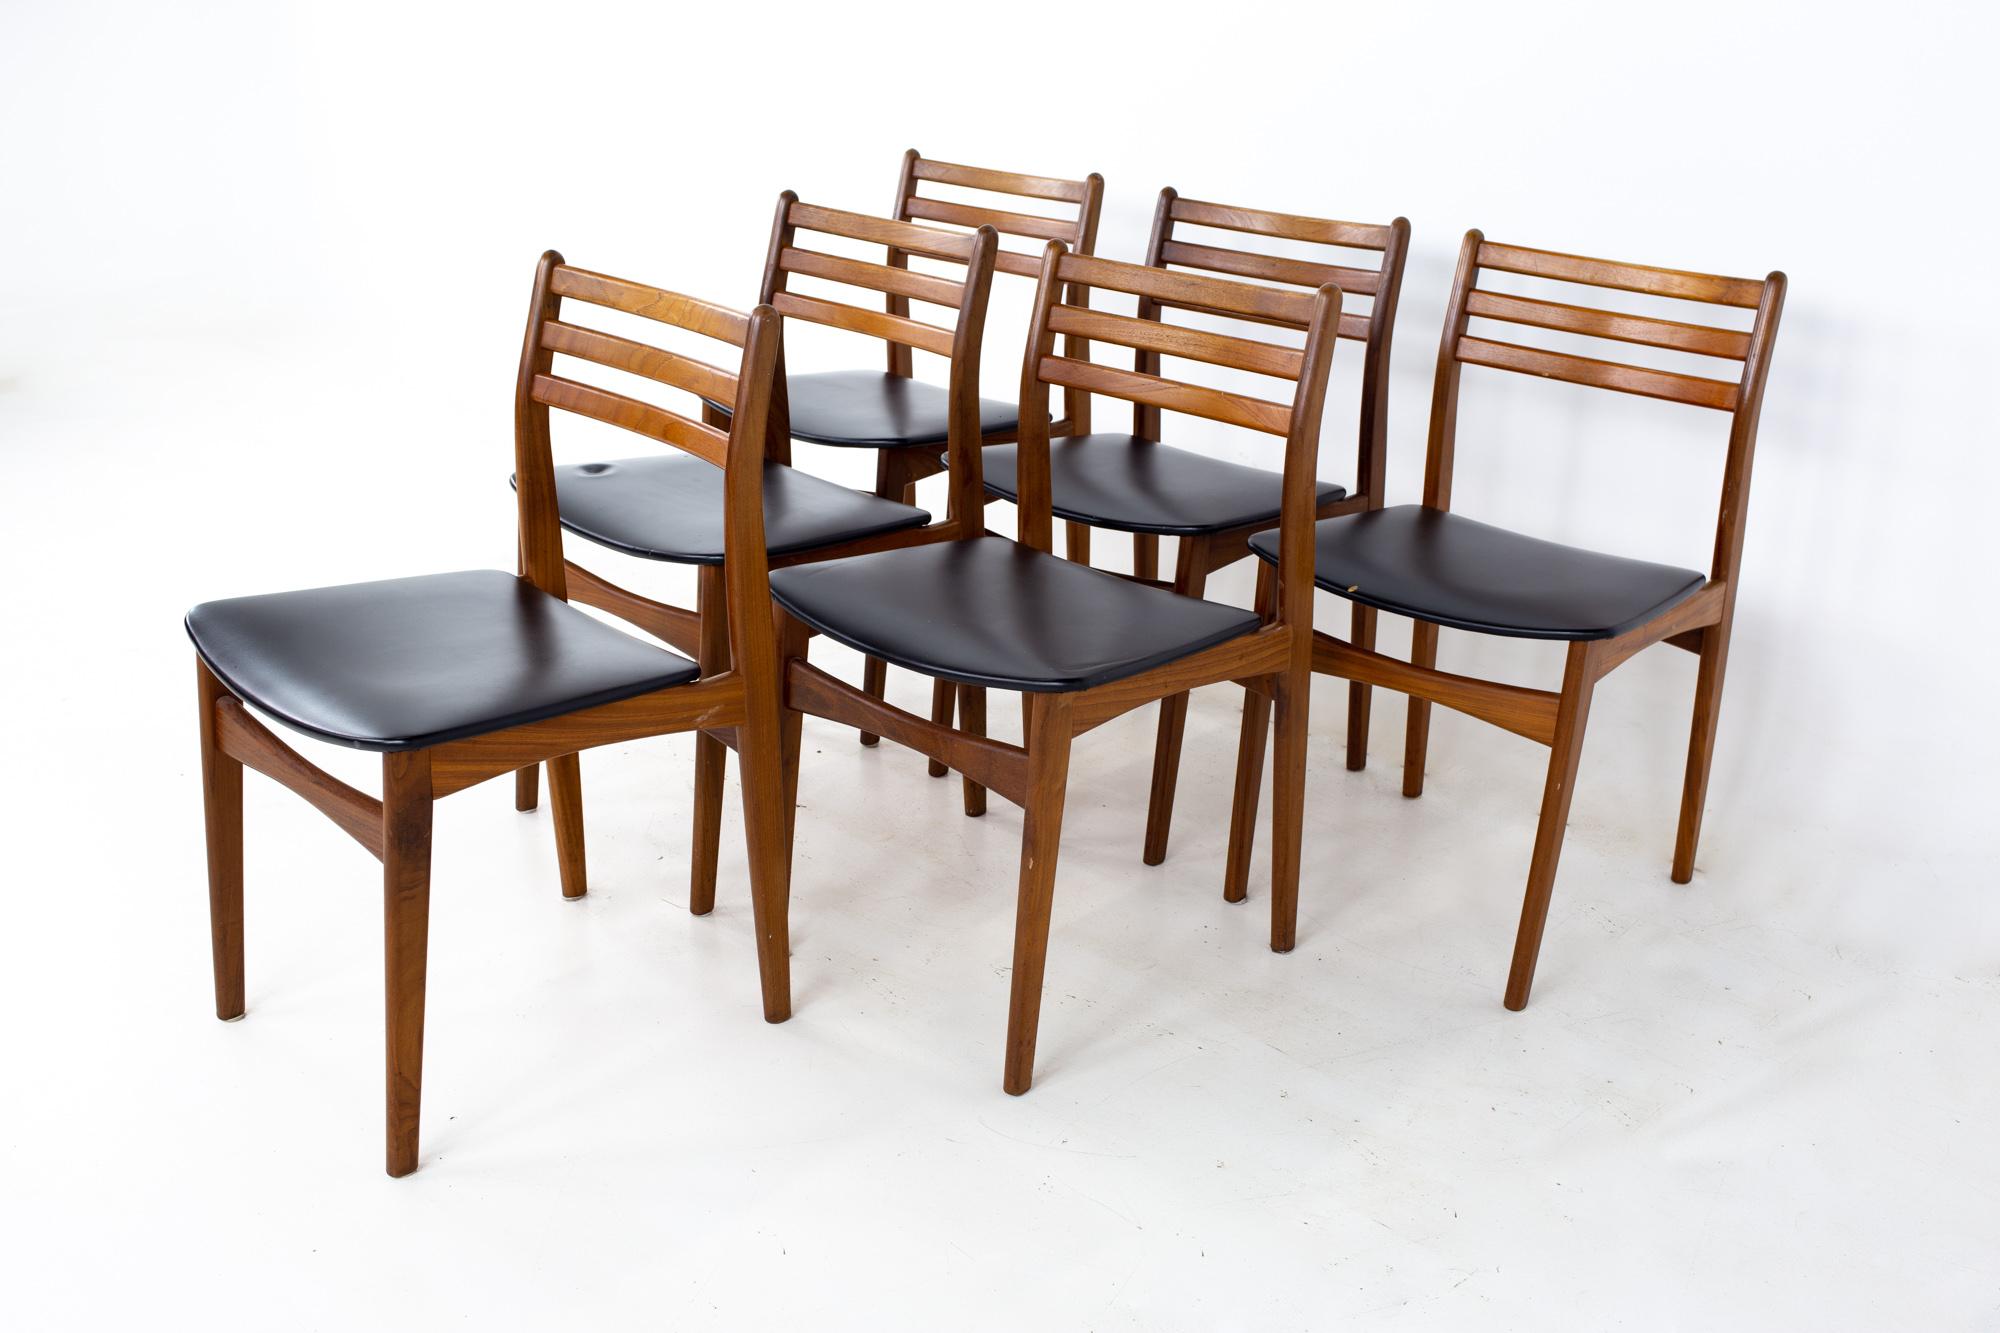 Mid century Danish teak dining chairs - Set of 6
Each chair measures: 18.5 wide x 18 deep x 31 high, with a seat height of 17.5 inches

All pieces of furniture can be had in what we call restored vintage condition. That means the piece is